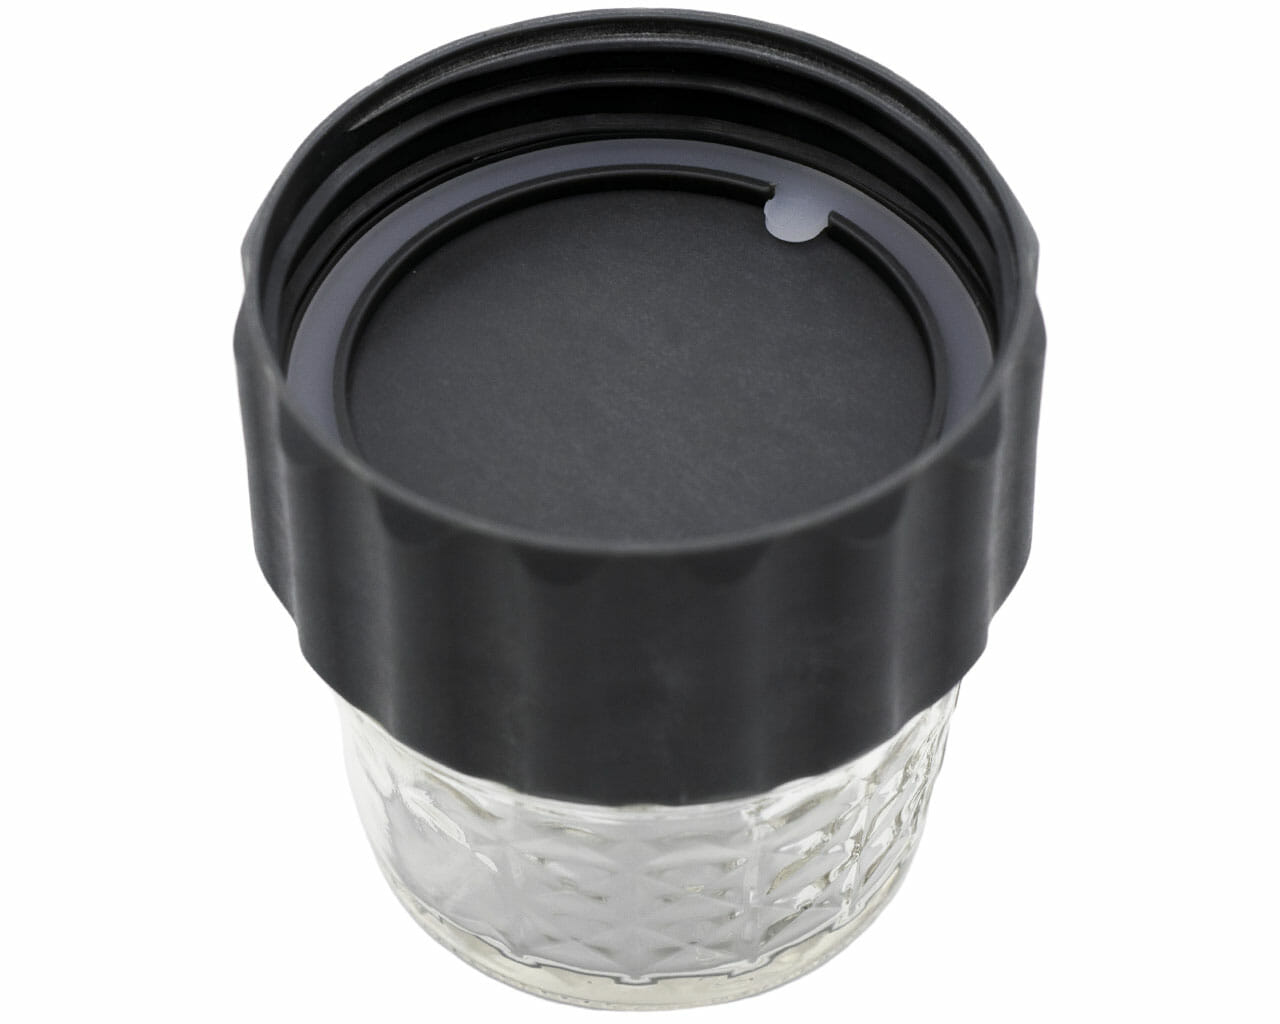 2-in-1 Lid to Connect Two Regular Mouth Mason Jars